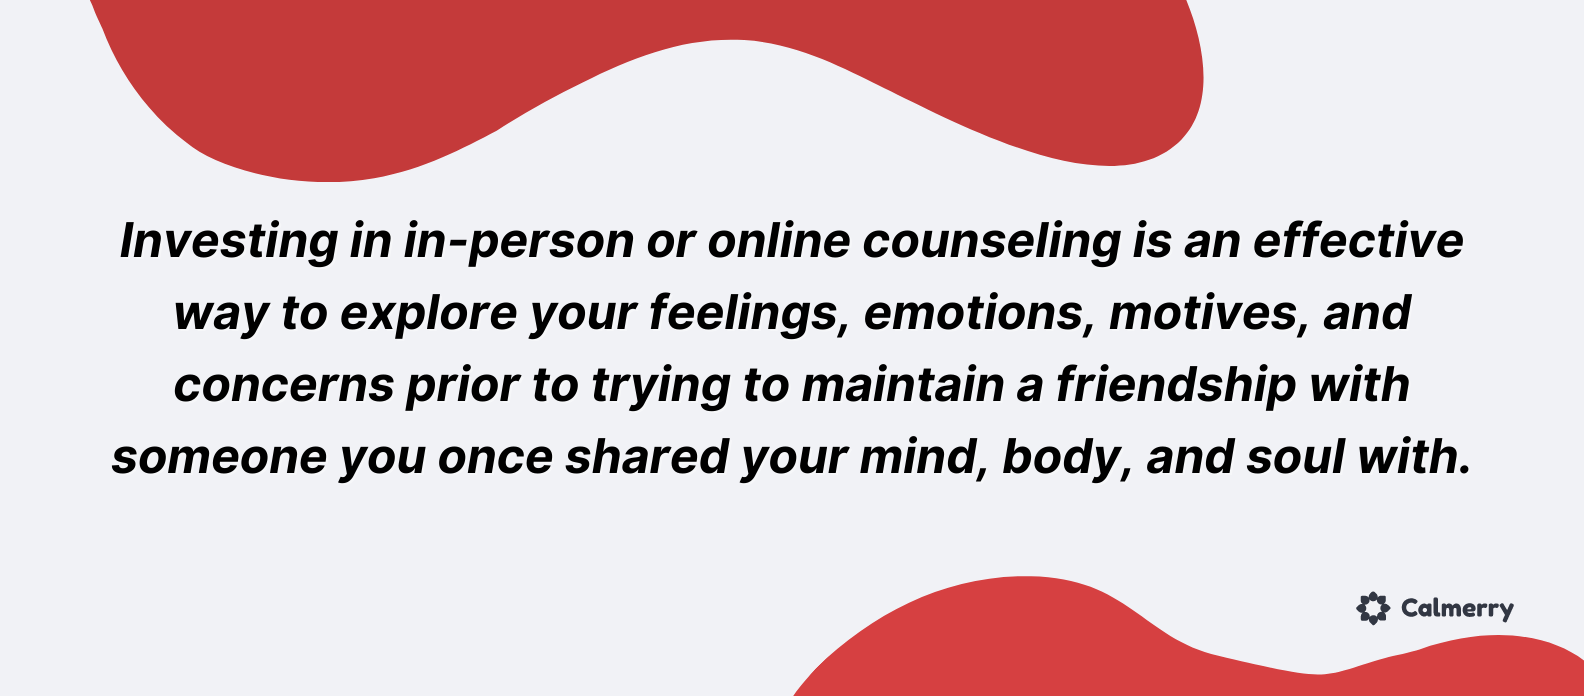 Investing in in-person or online counseling